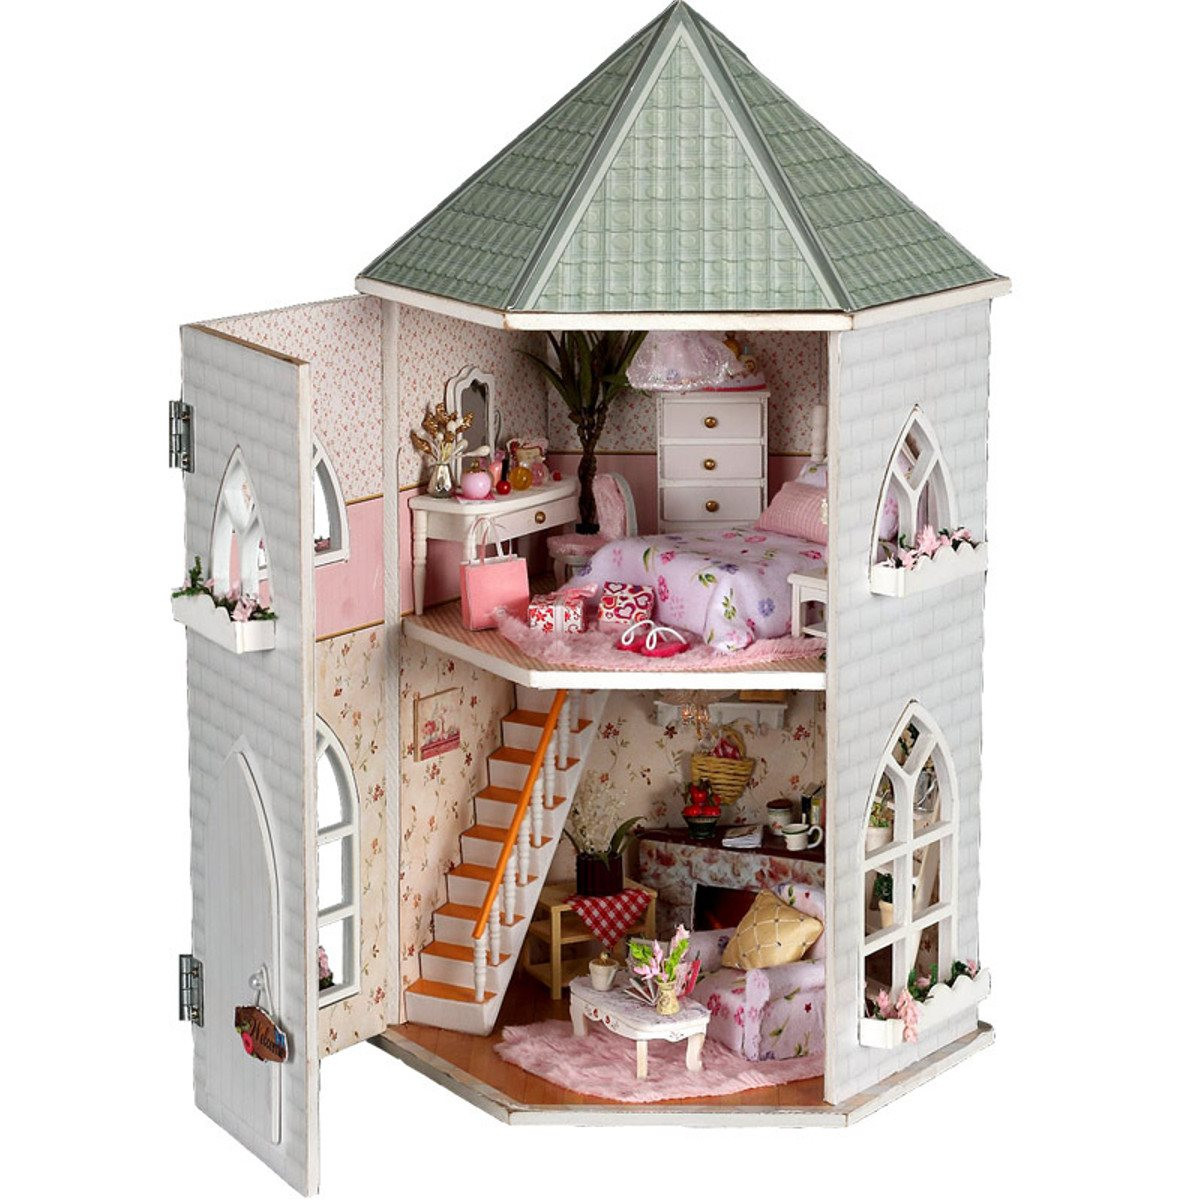 DIY Wooden Dollhouse Kits
 Love Castle DIY Wooden Dollhouse Miniature With Light And